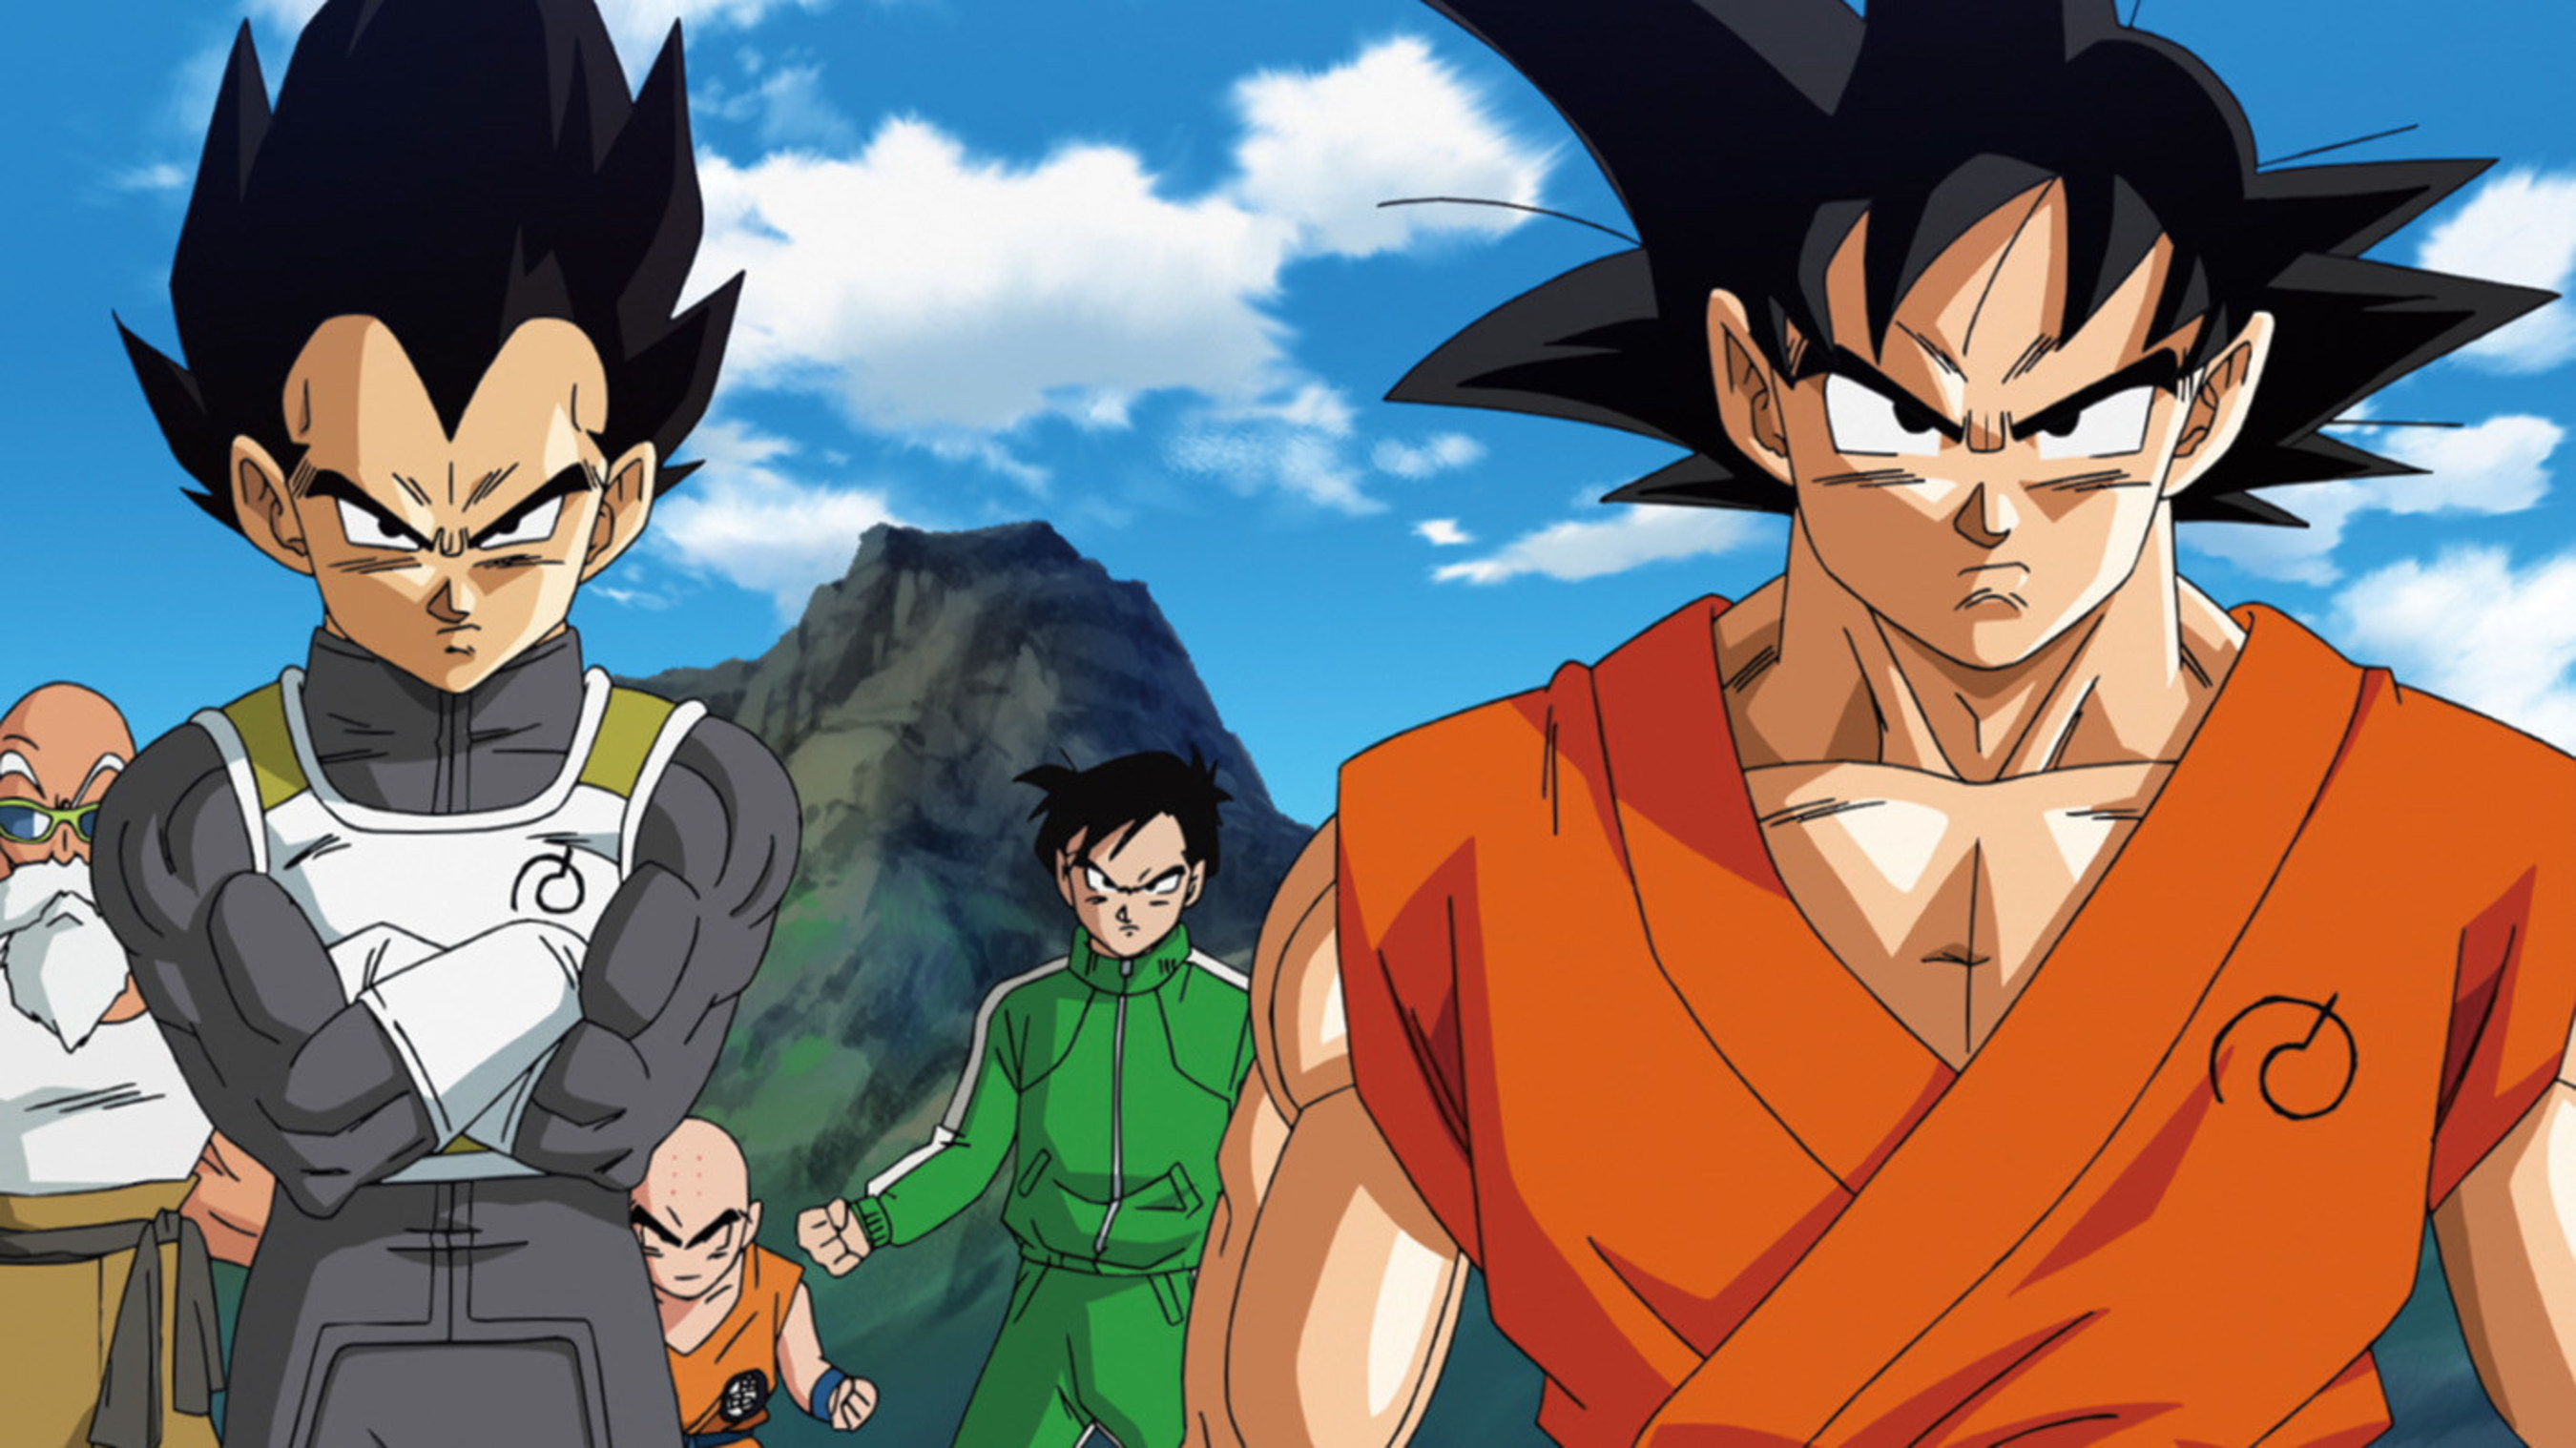 Dragon Ball Z: Resurrection 'F' Hits Theaters Across North America August 4